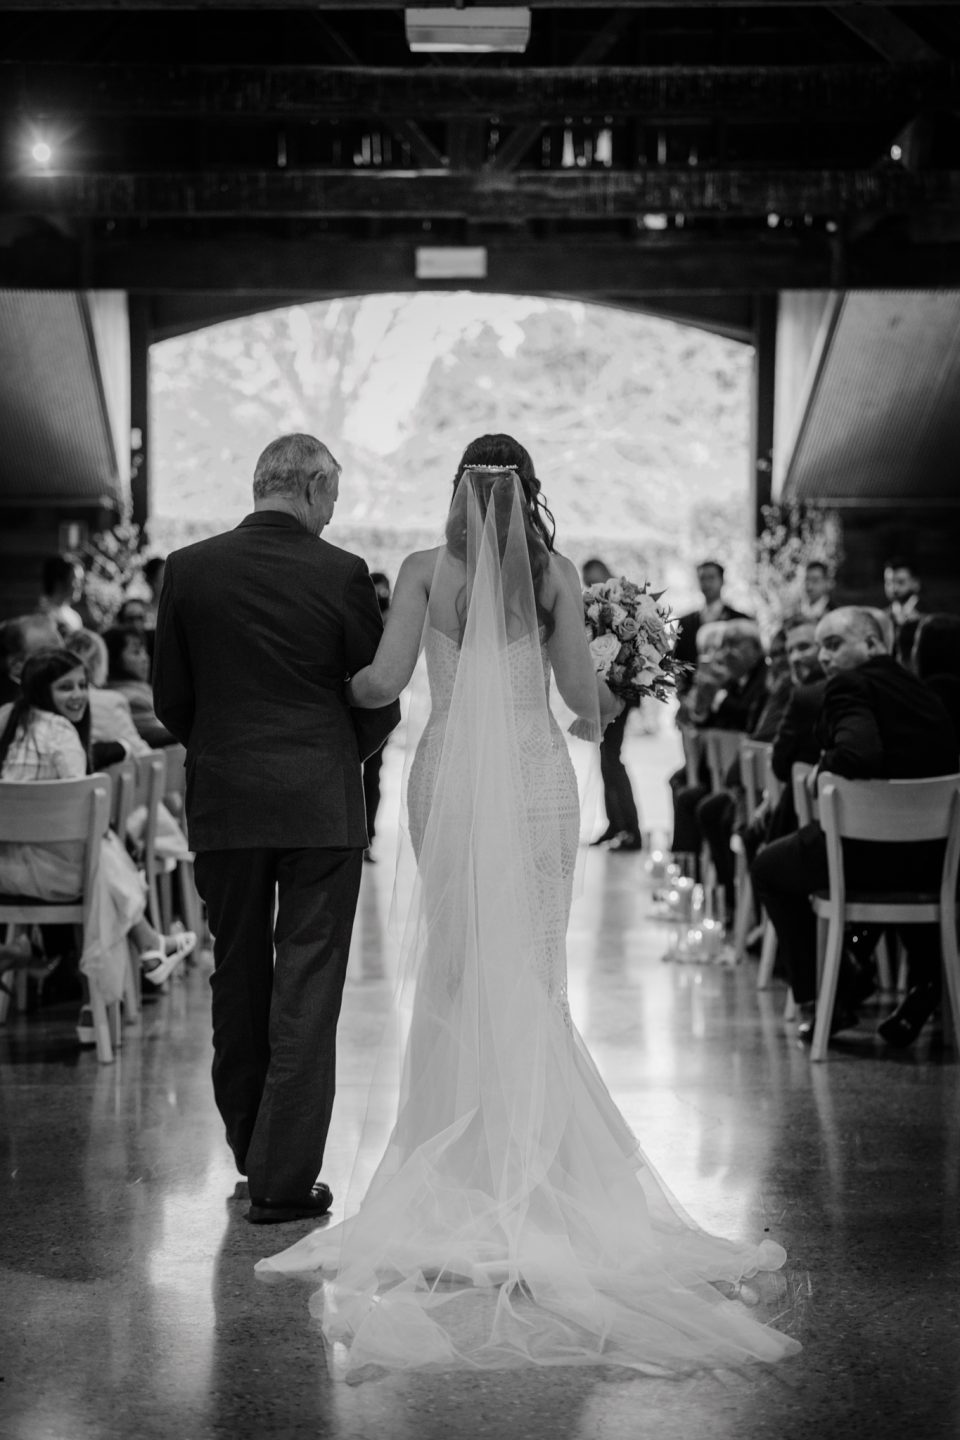 Wedding ceremony at Yering Station in the Yarra Valley